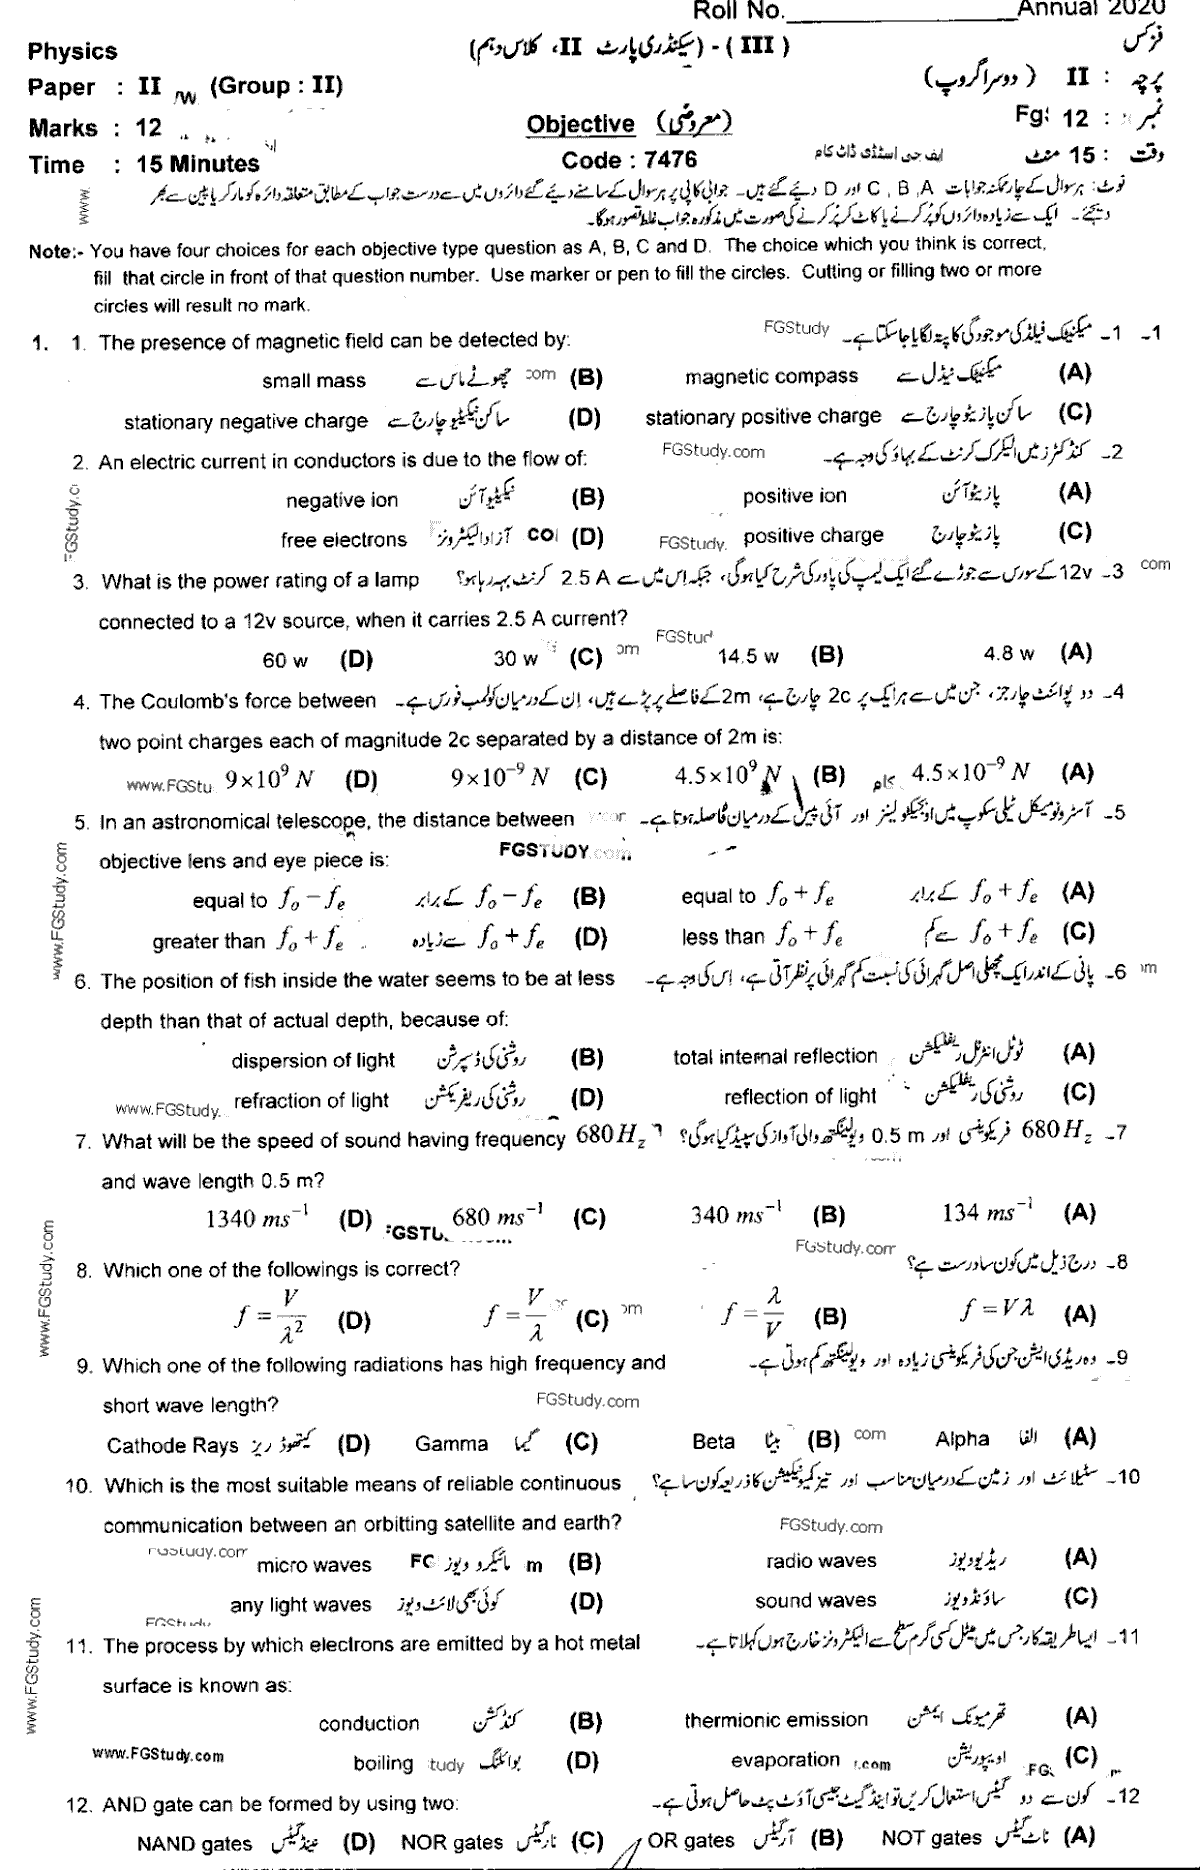 Physics Group 2 Objective 10th Class Past Papers 2020